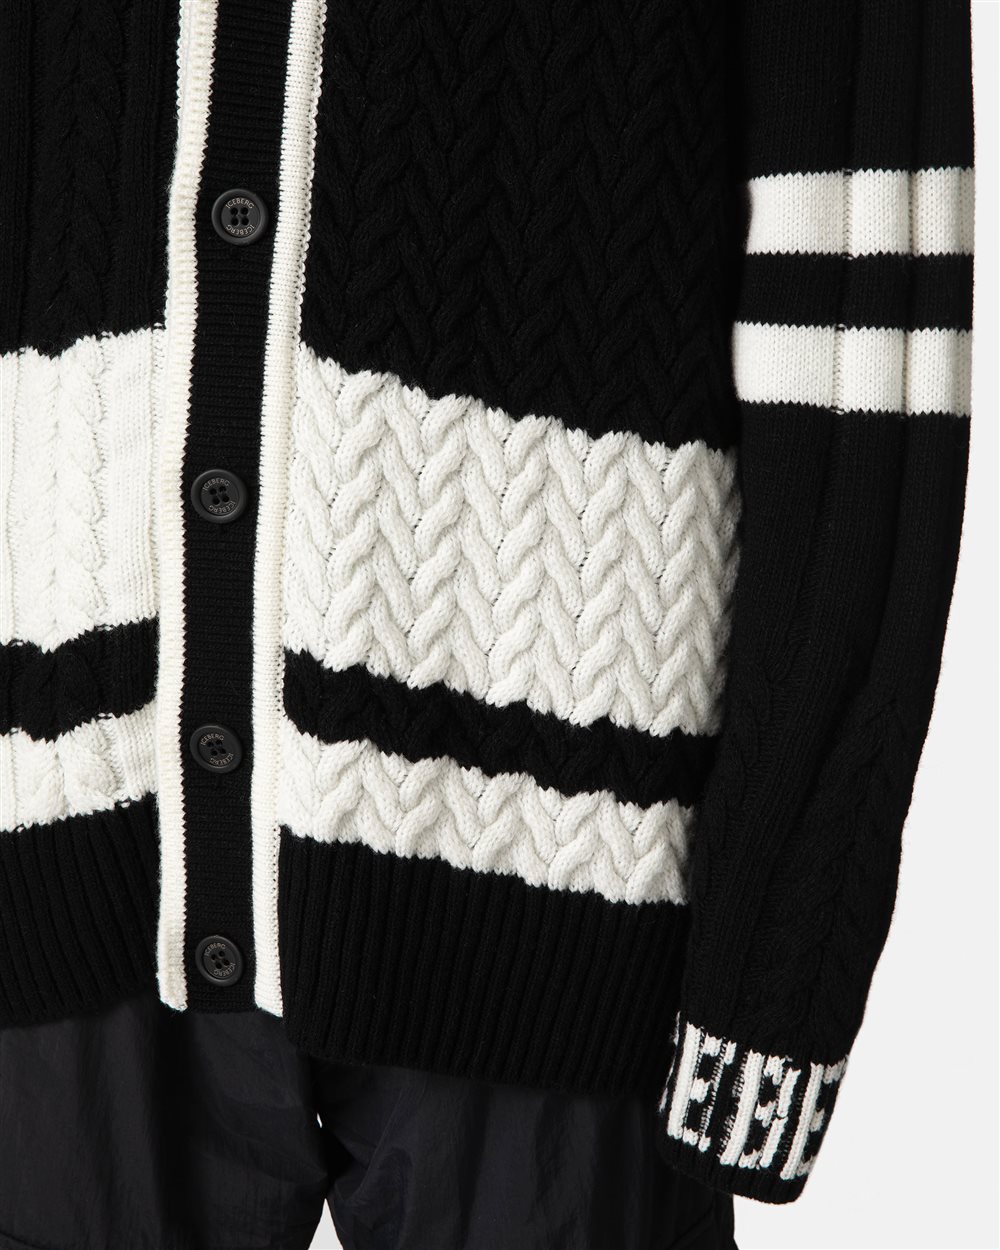 Black cable knit cardigan - Iceberg - Official Website